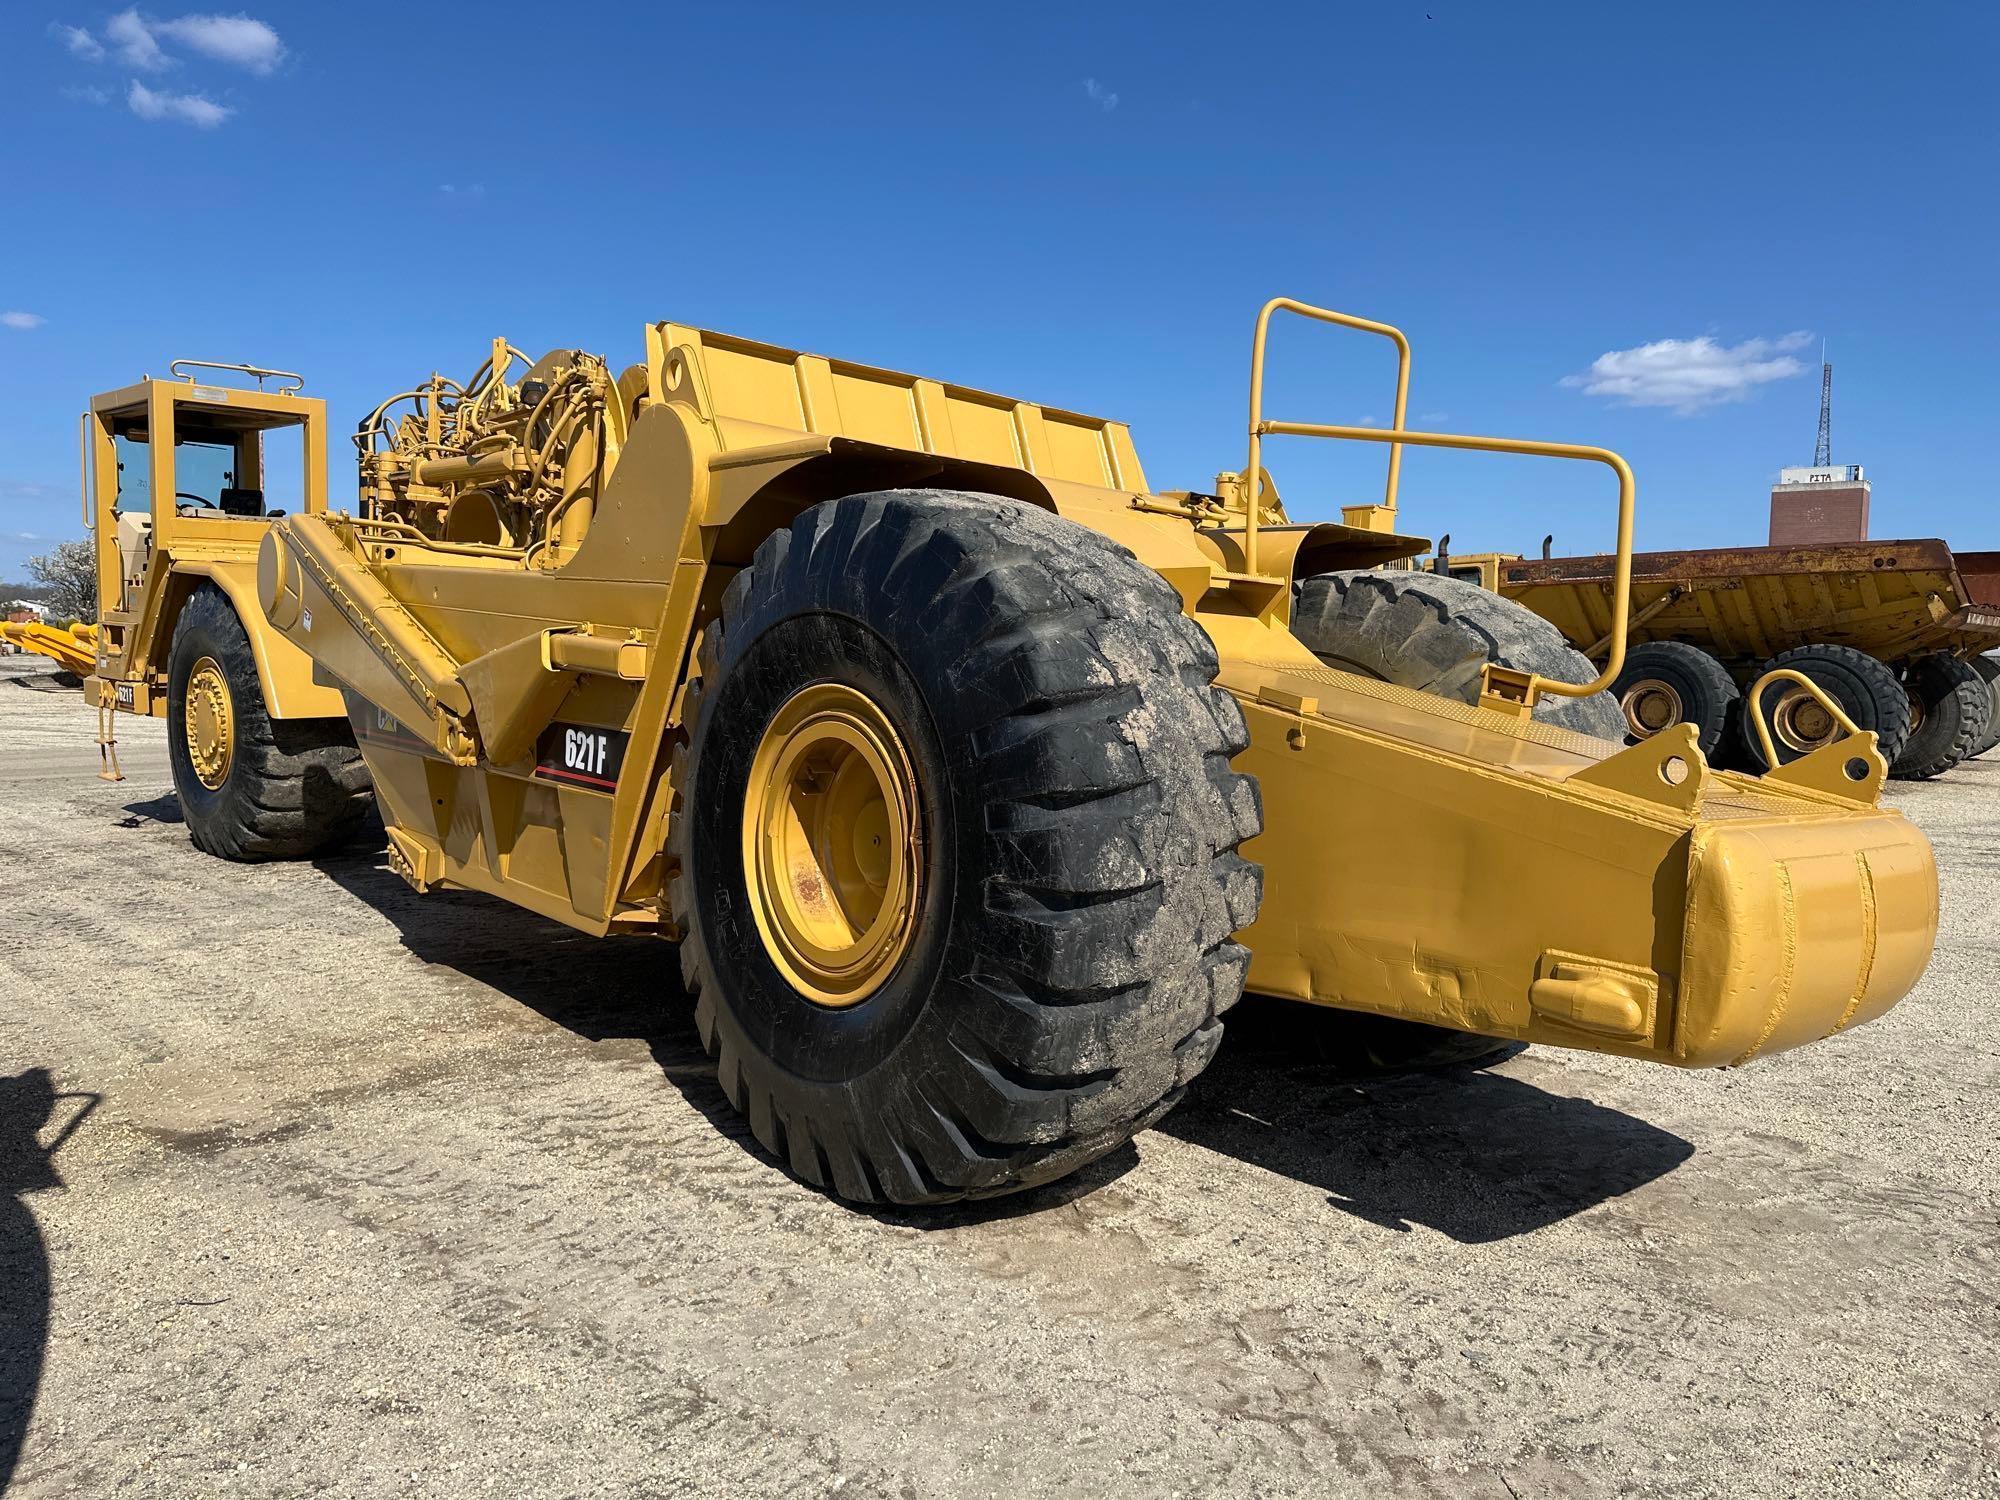 CAT 621F MOTOR SCRAPER SN:4SK00858 powered by Cat 3406CTA diesel engine, 330hp, equipped with